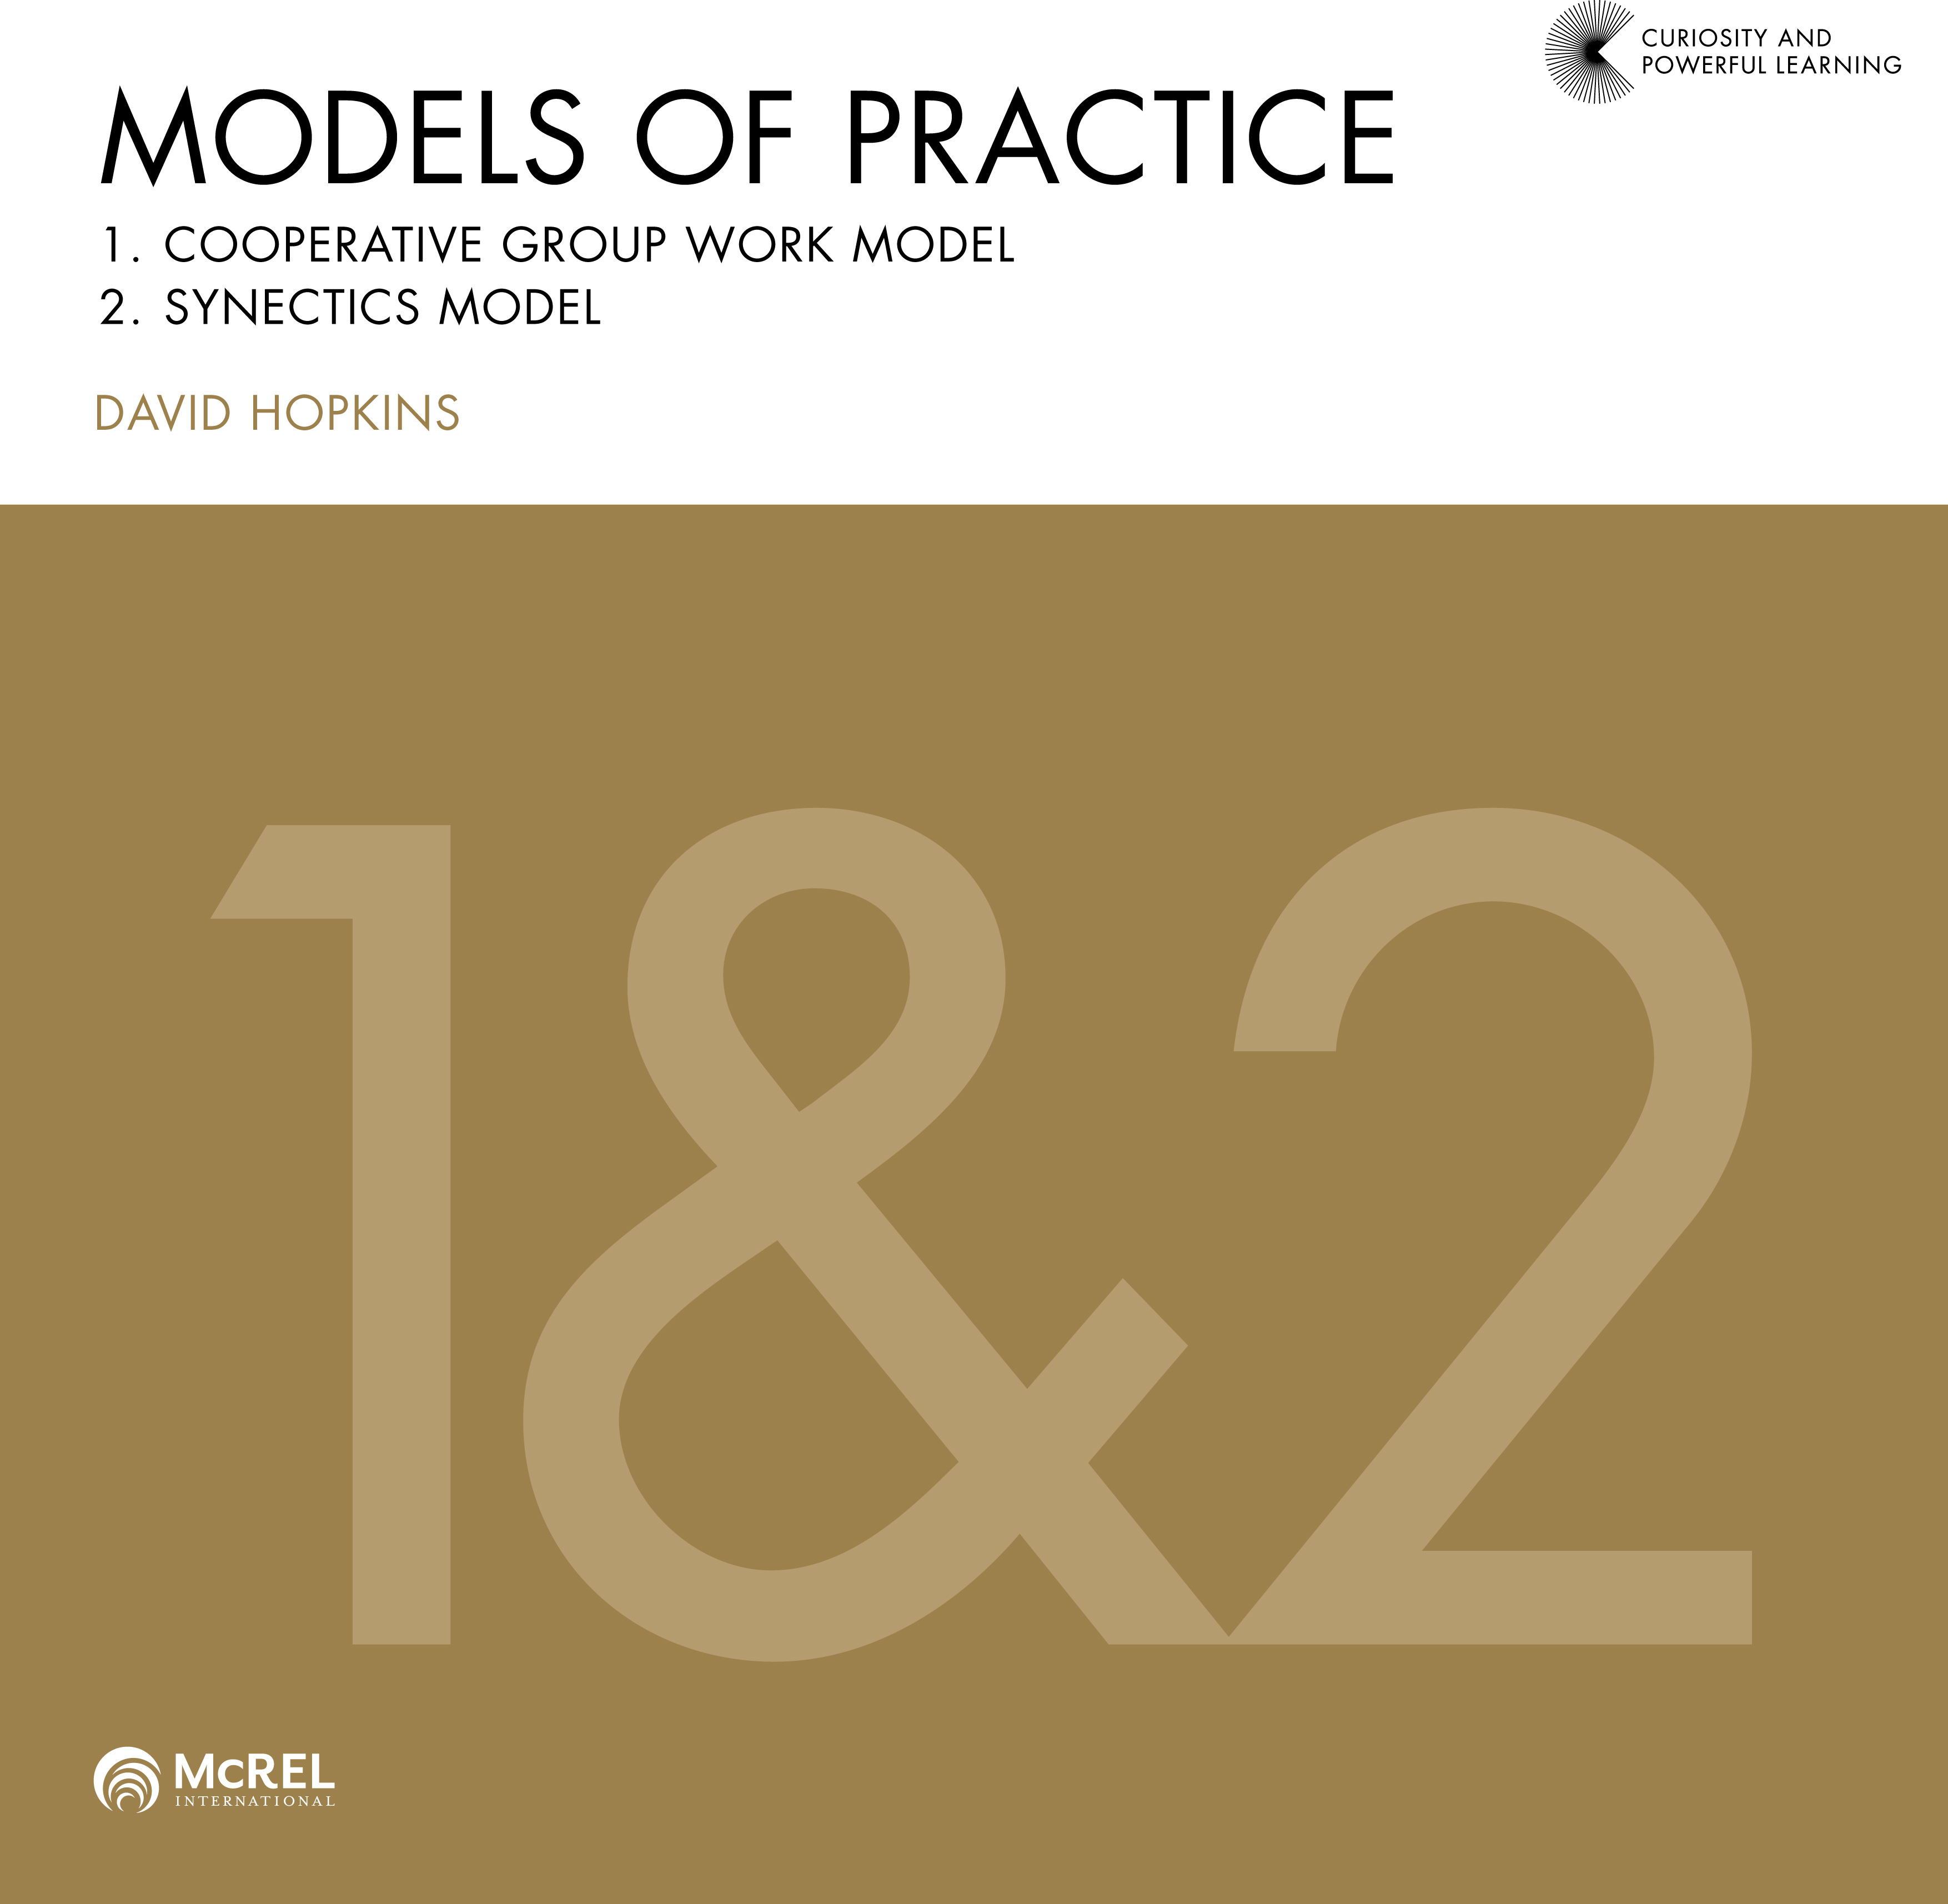 Models of Practice 1 and 2